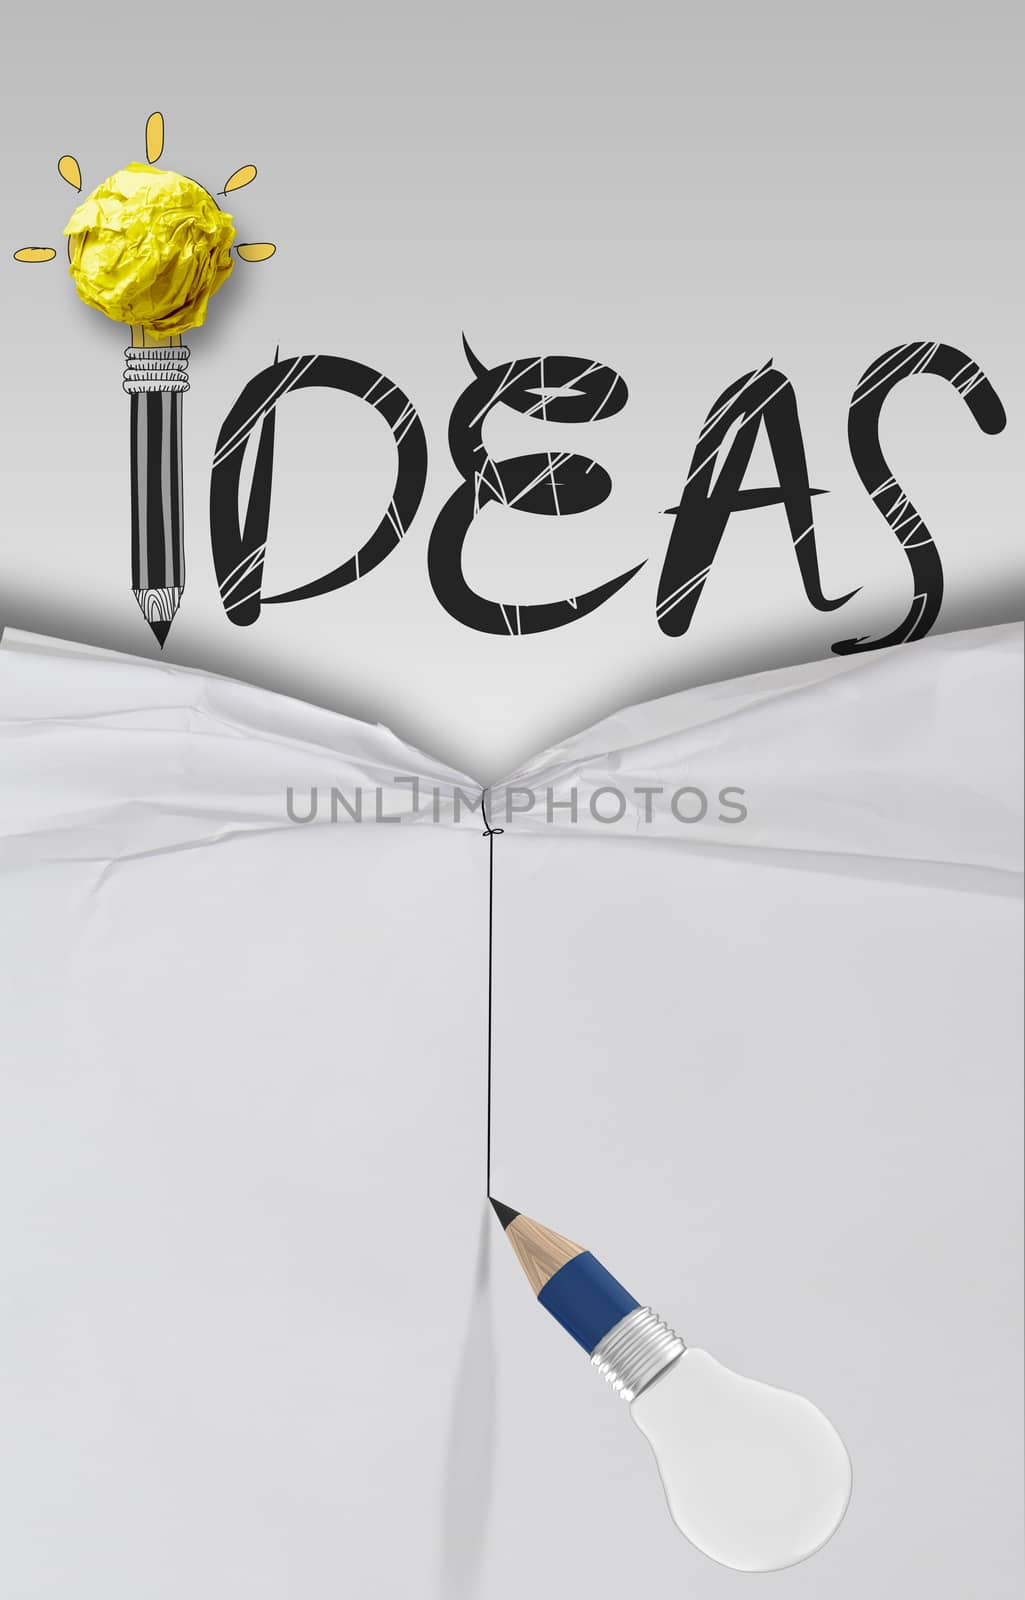 pencil lightbulb 3D draw rope open wrinkled paper show graphic design word IDEA as concept